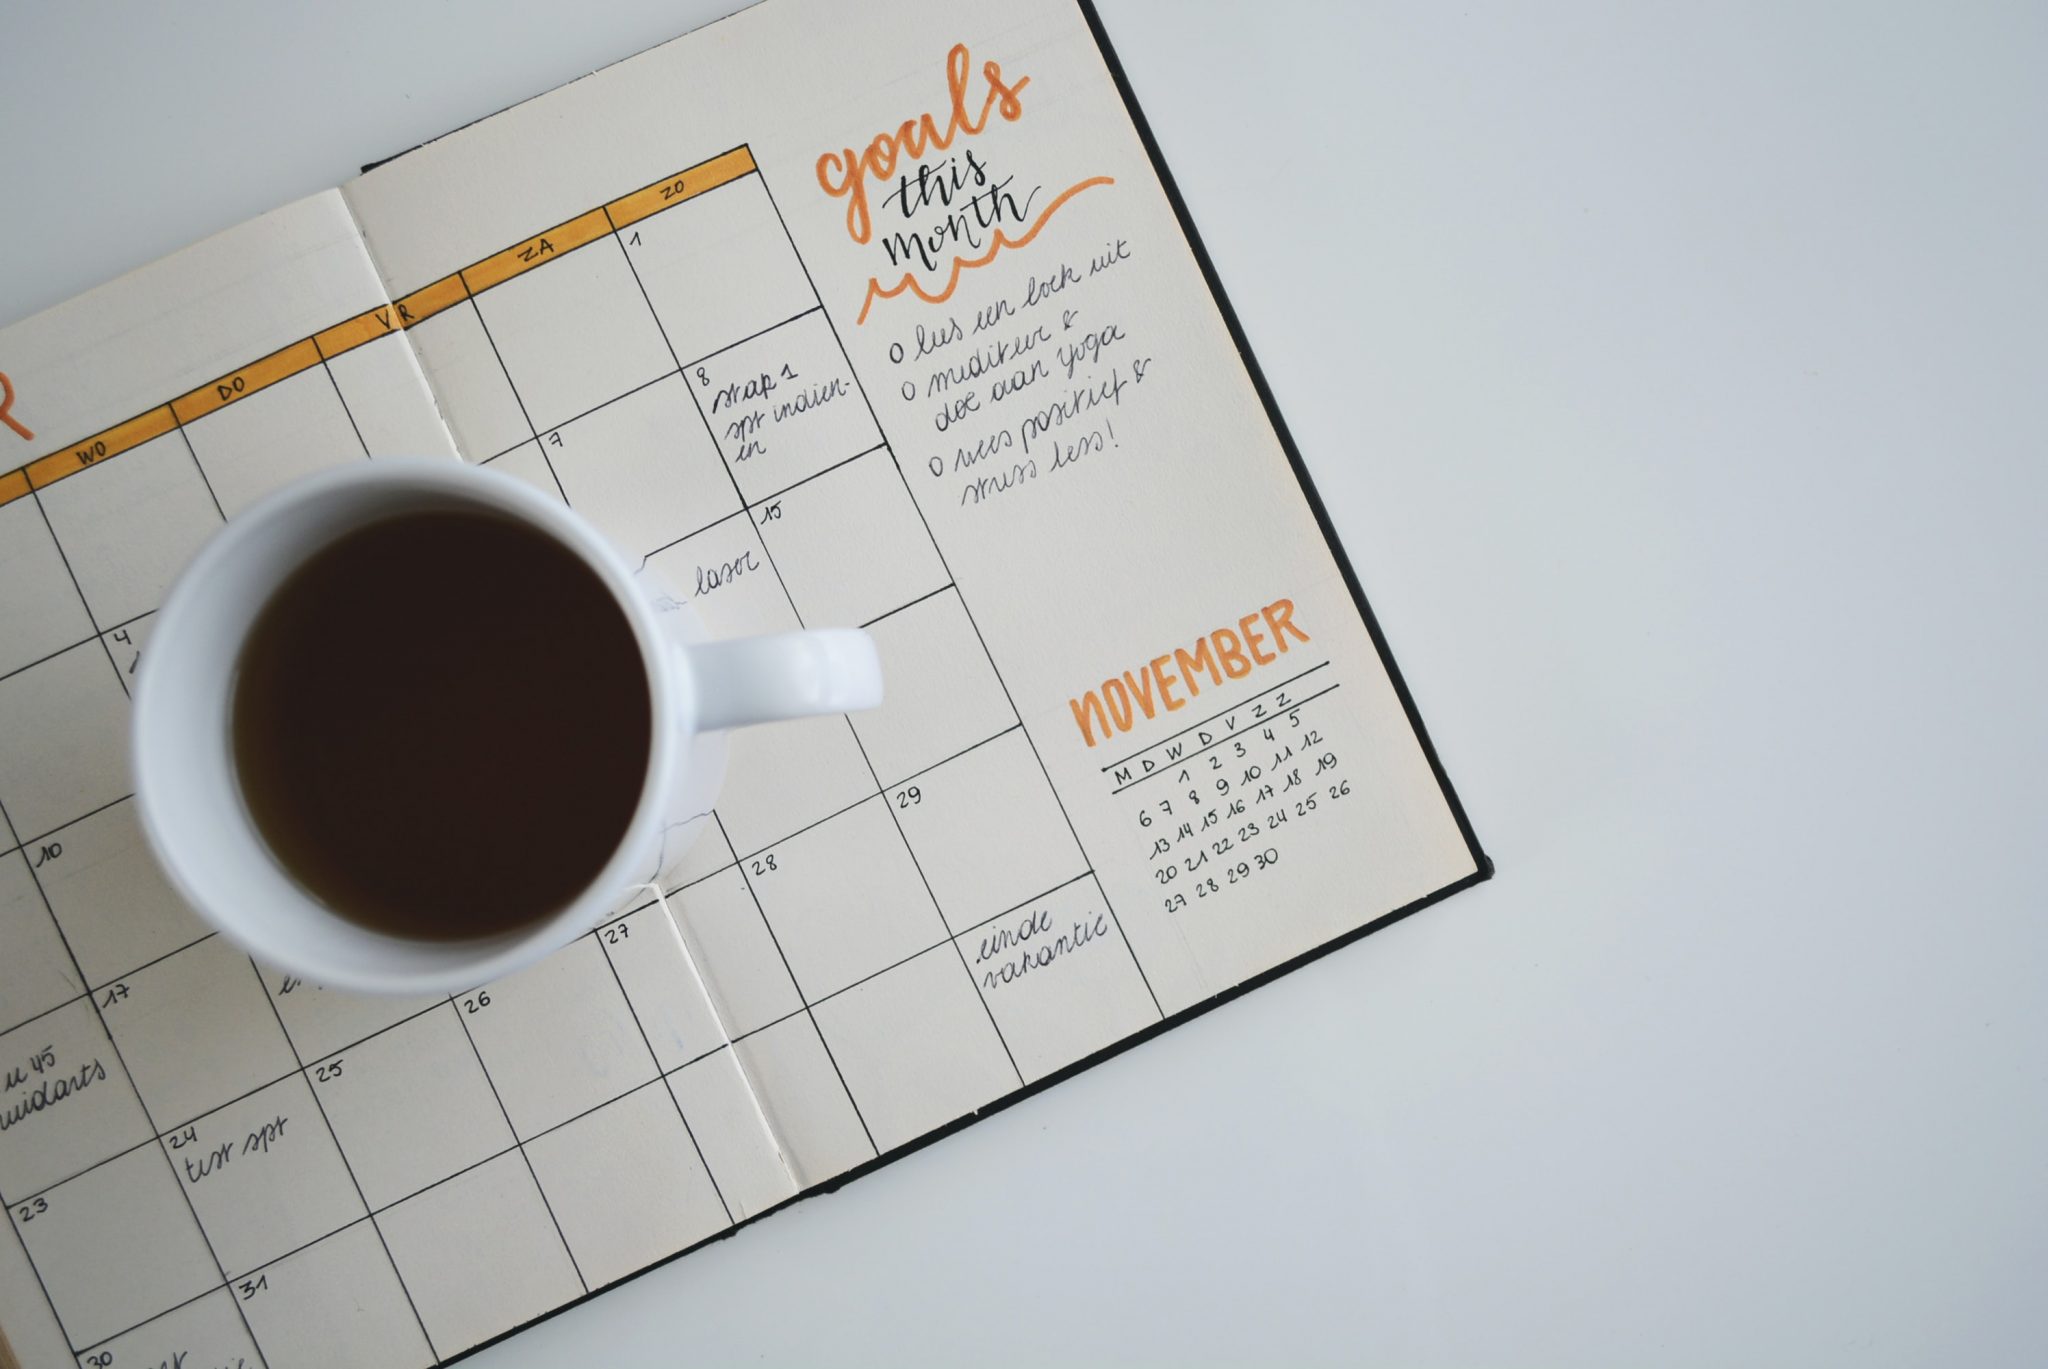 Timetable and coffee